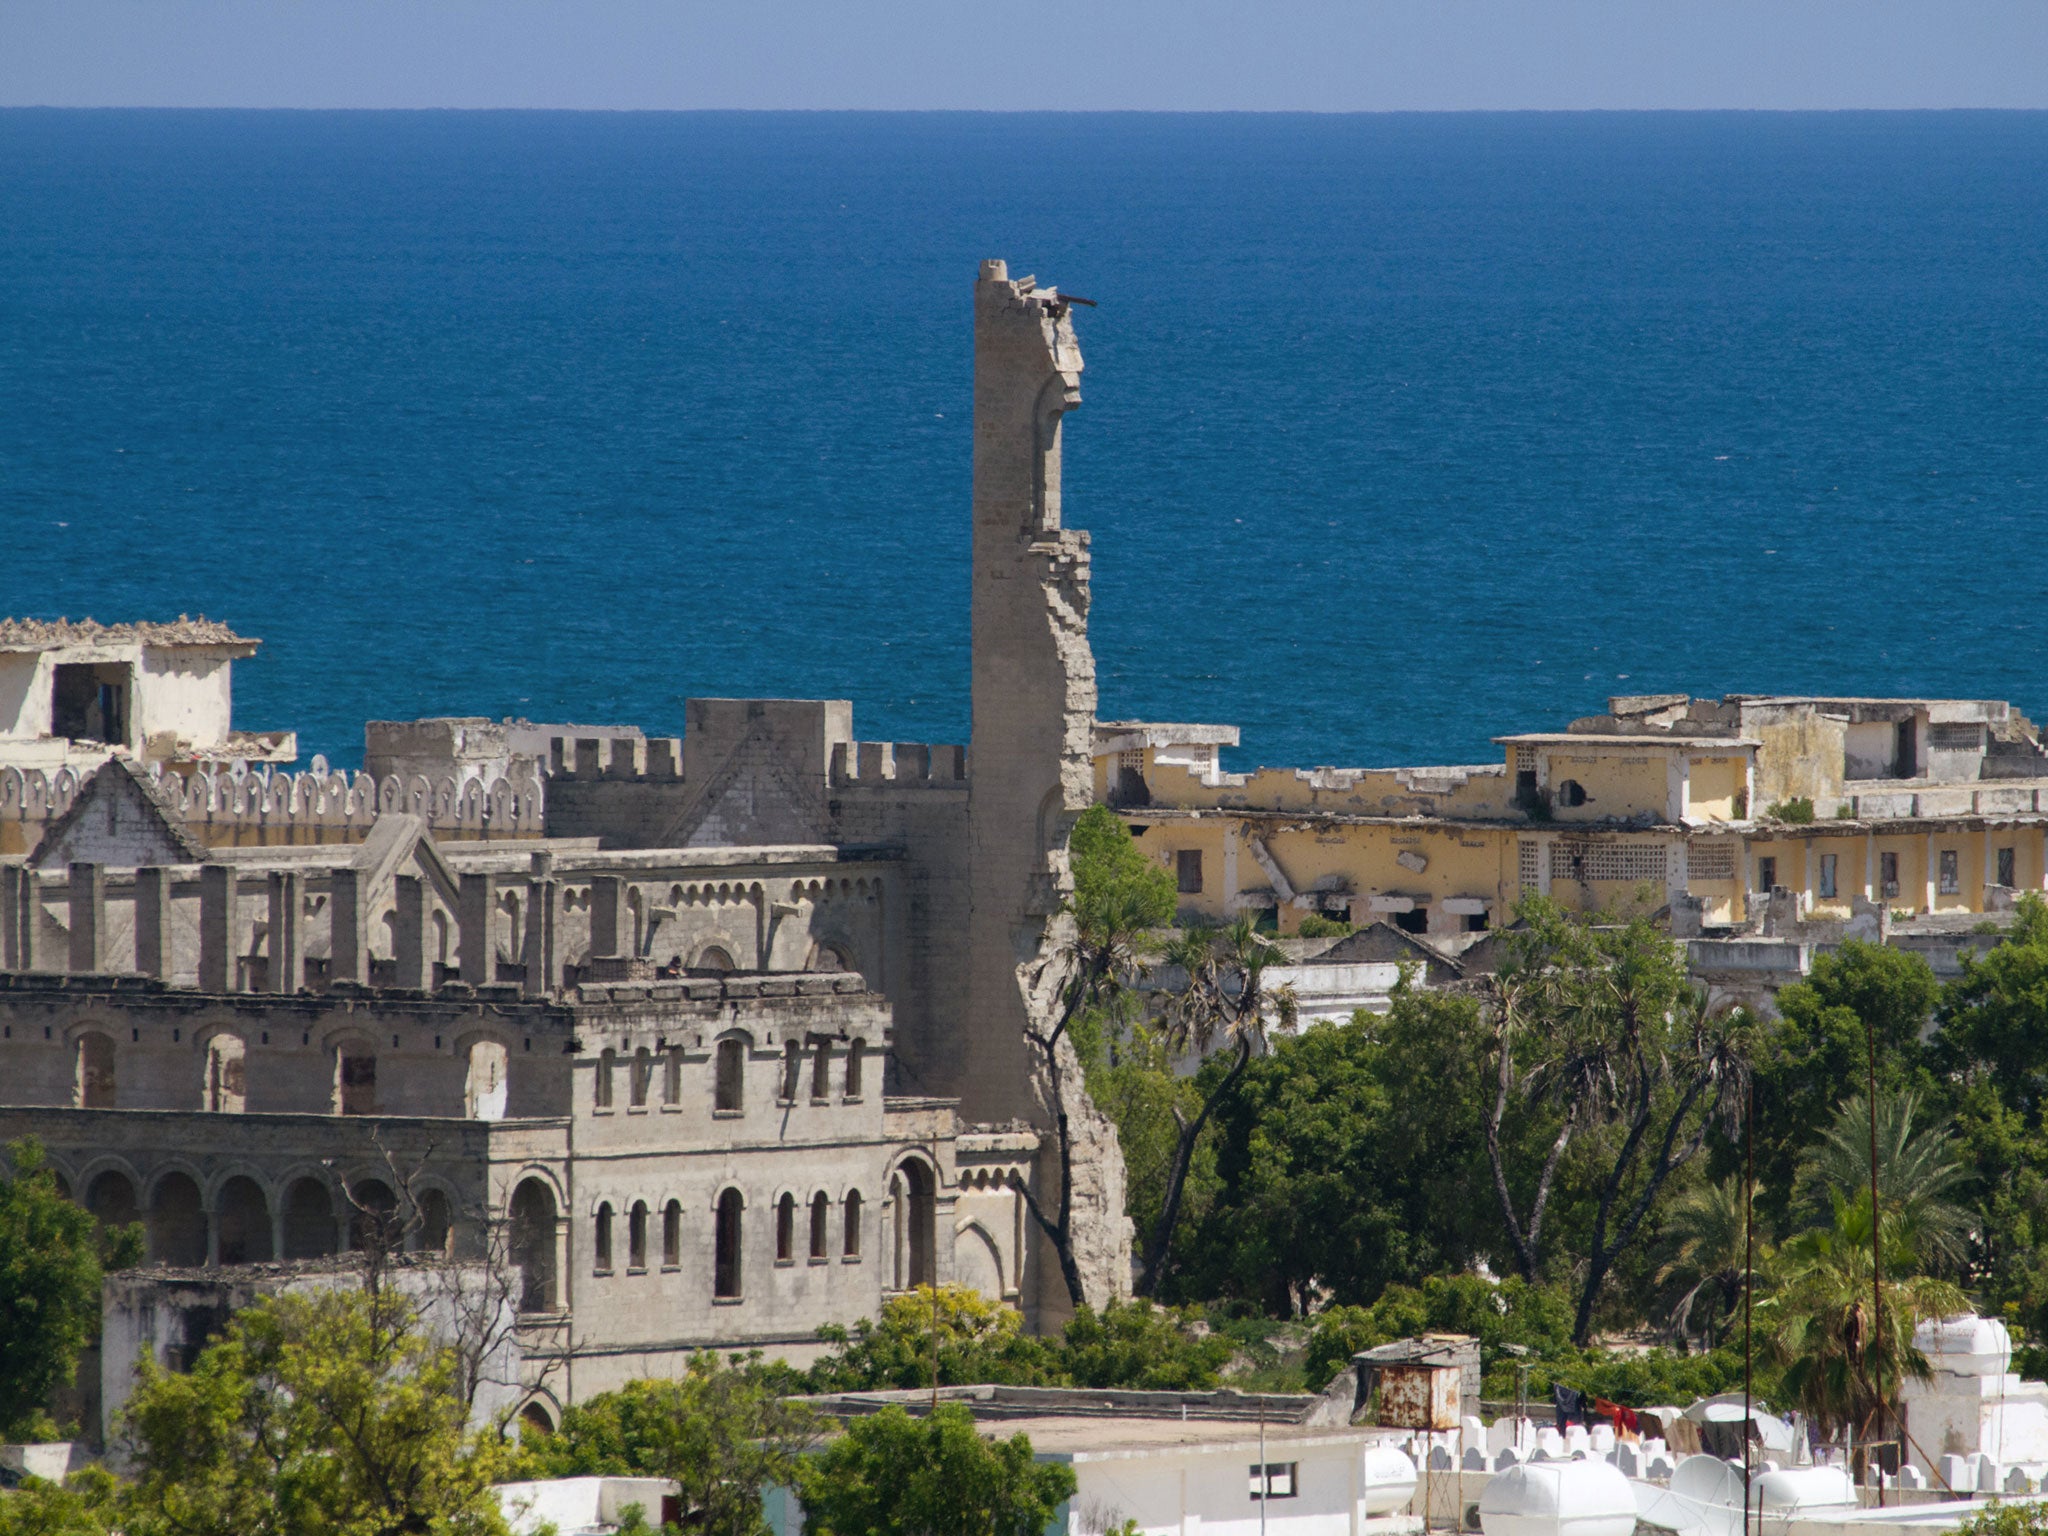 'Villa Somalia', the presidential palace in Mogadishu, is located across from the Somali Youth League hotel